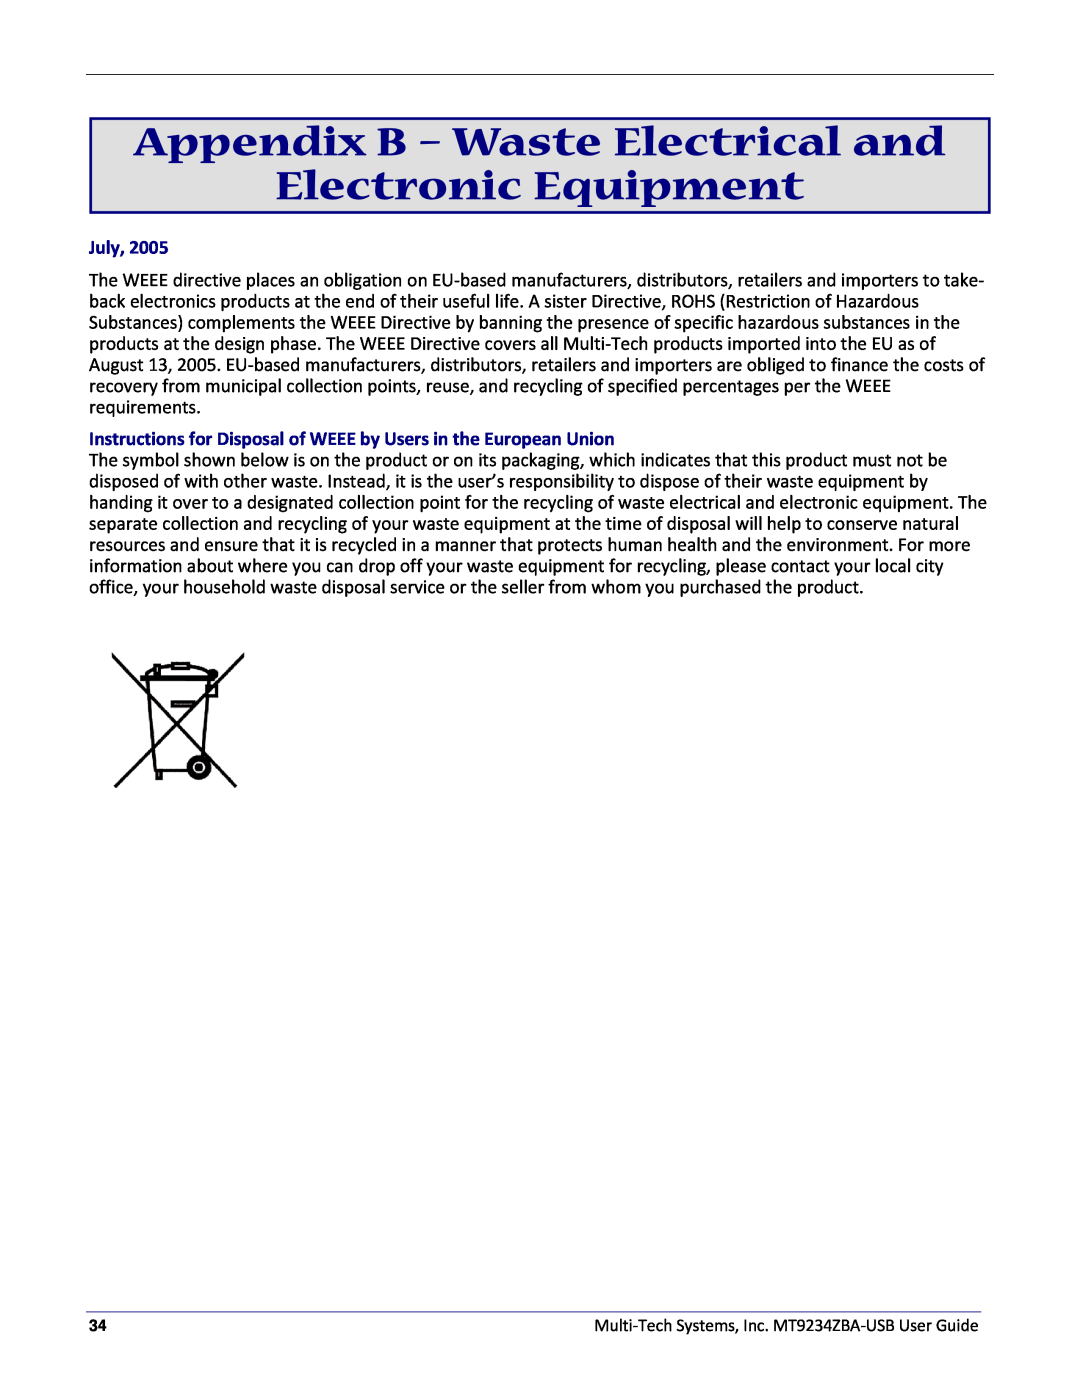 Multitech MT9234ZBA-USB manual Appendix B - Waste Electrical and Electronic Equipment, July 